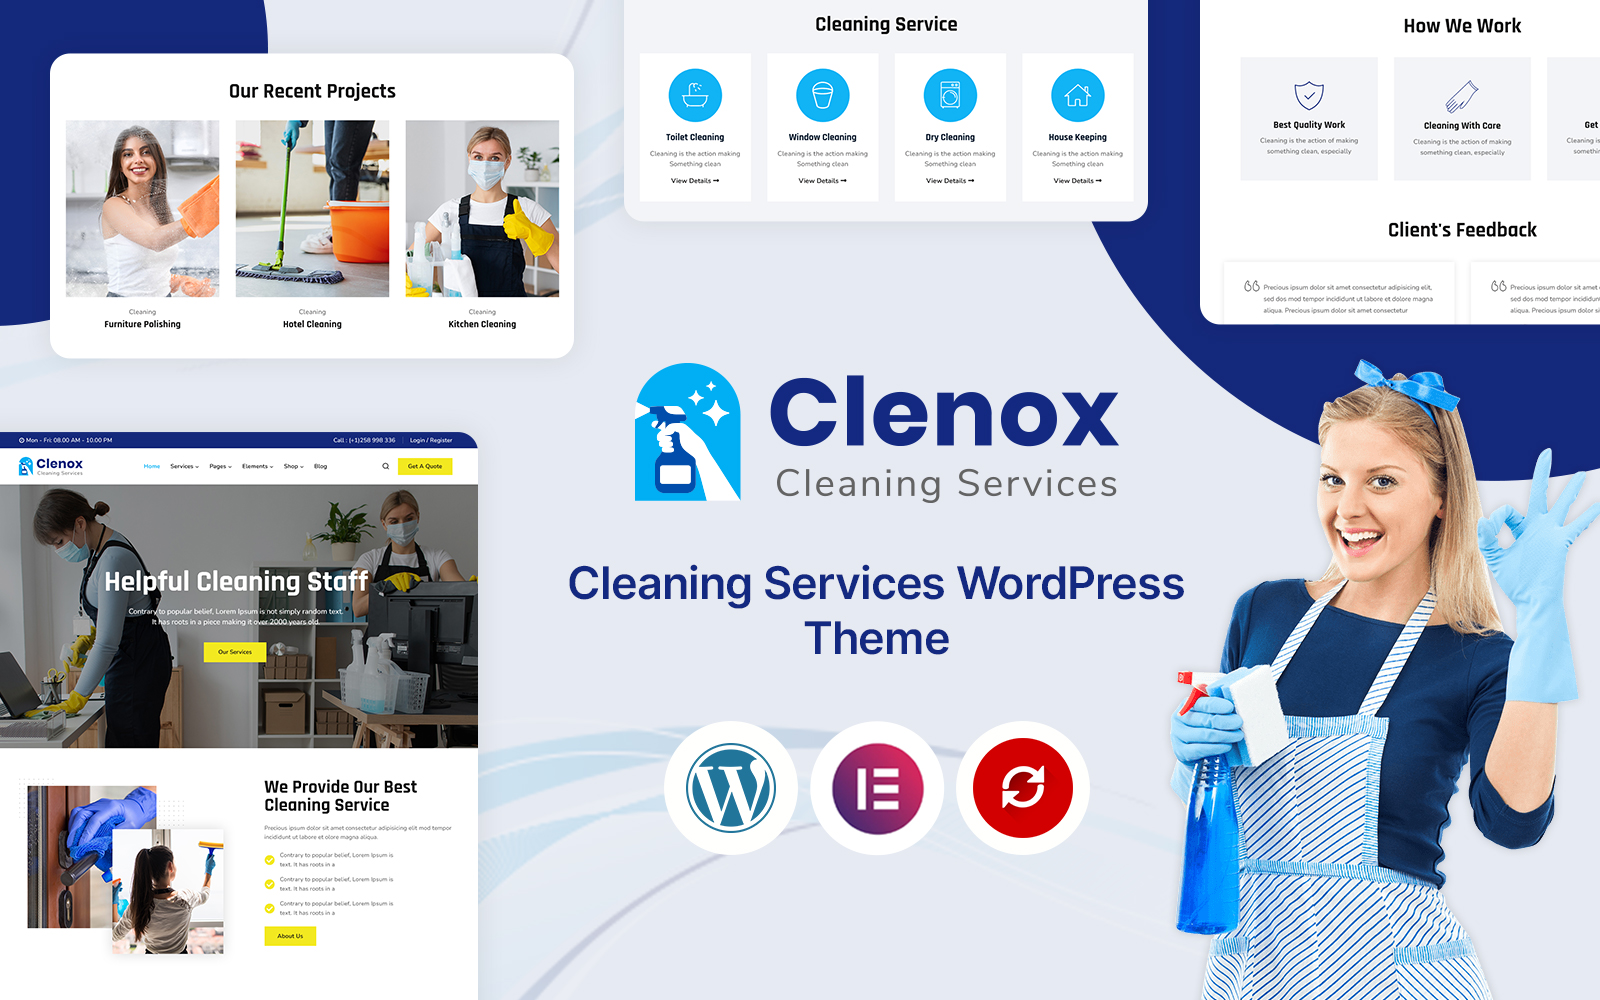 Clenox - Cleaning Services WordPress Theme